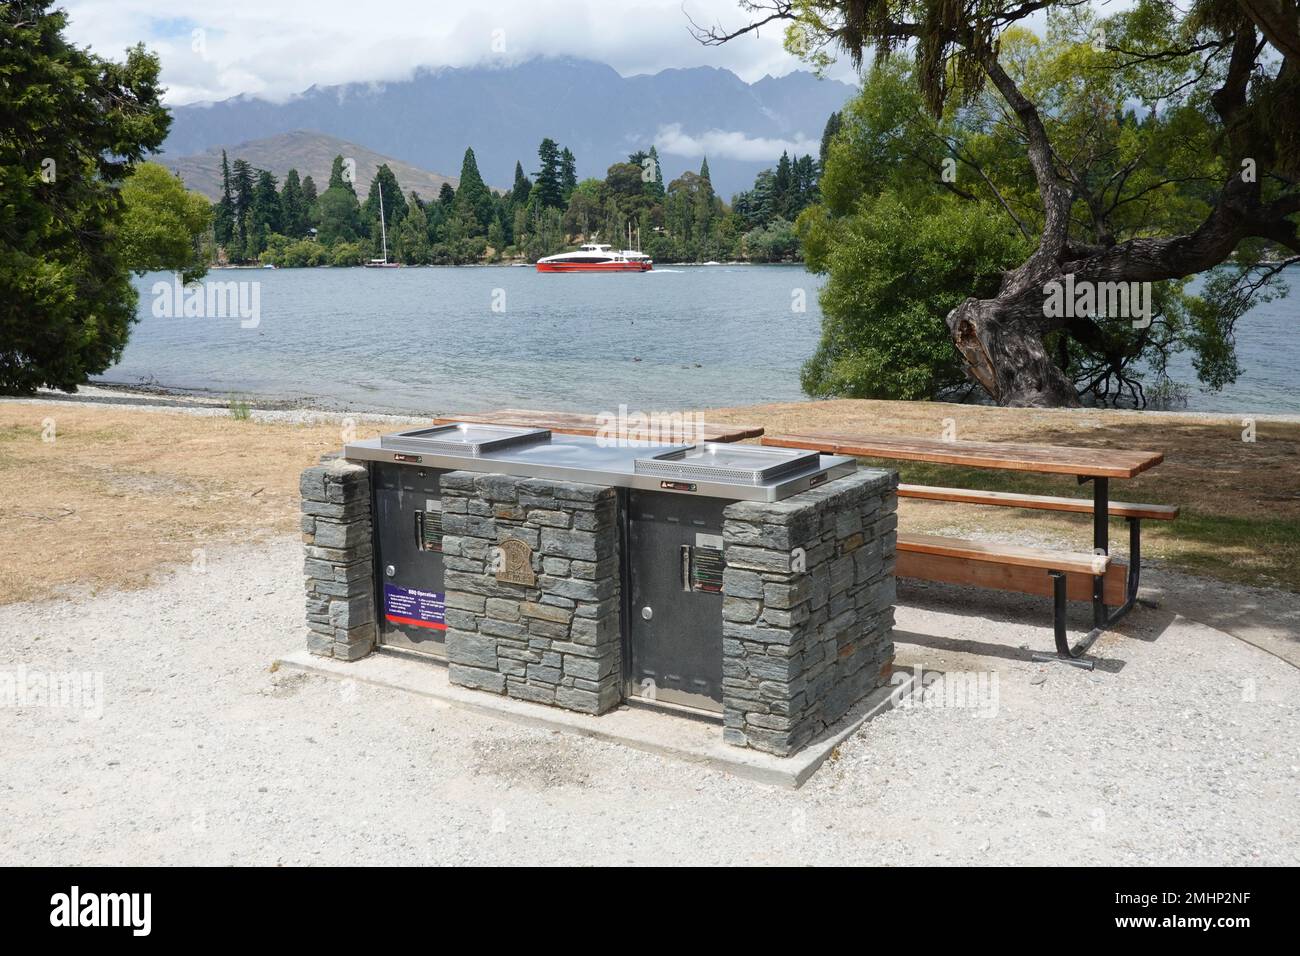 Public BBQ Saint Omer Park, on the shores of Lake Wakatipu Queenstown, New Zealand Stock Photo